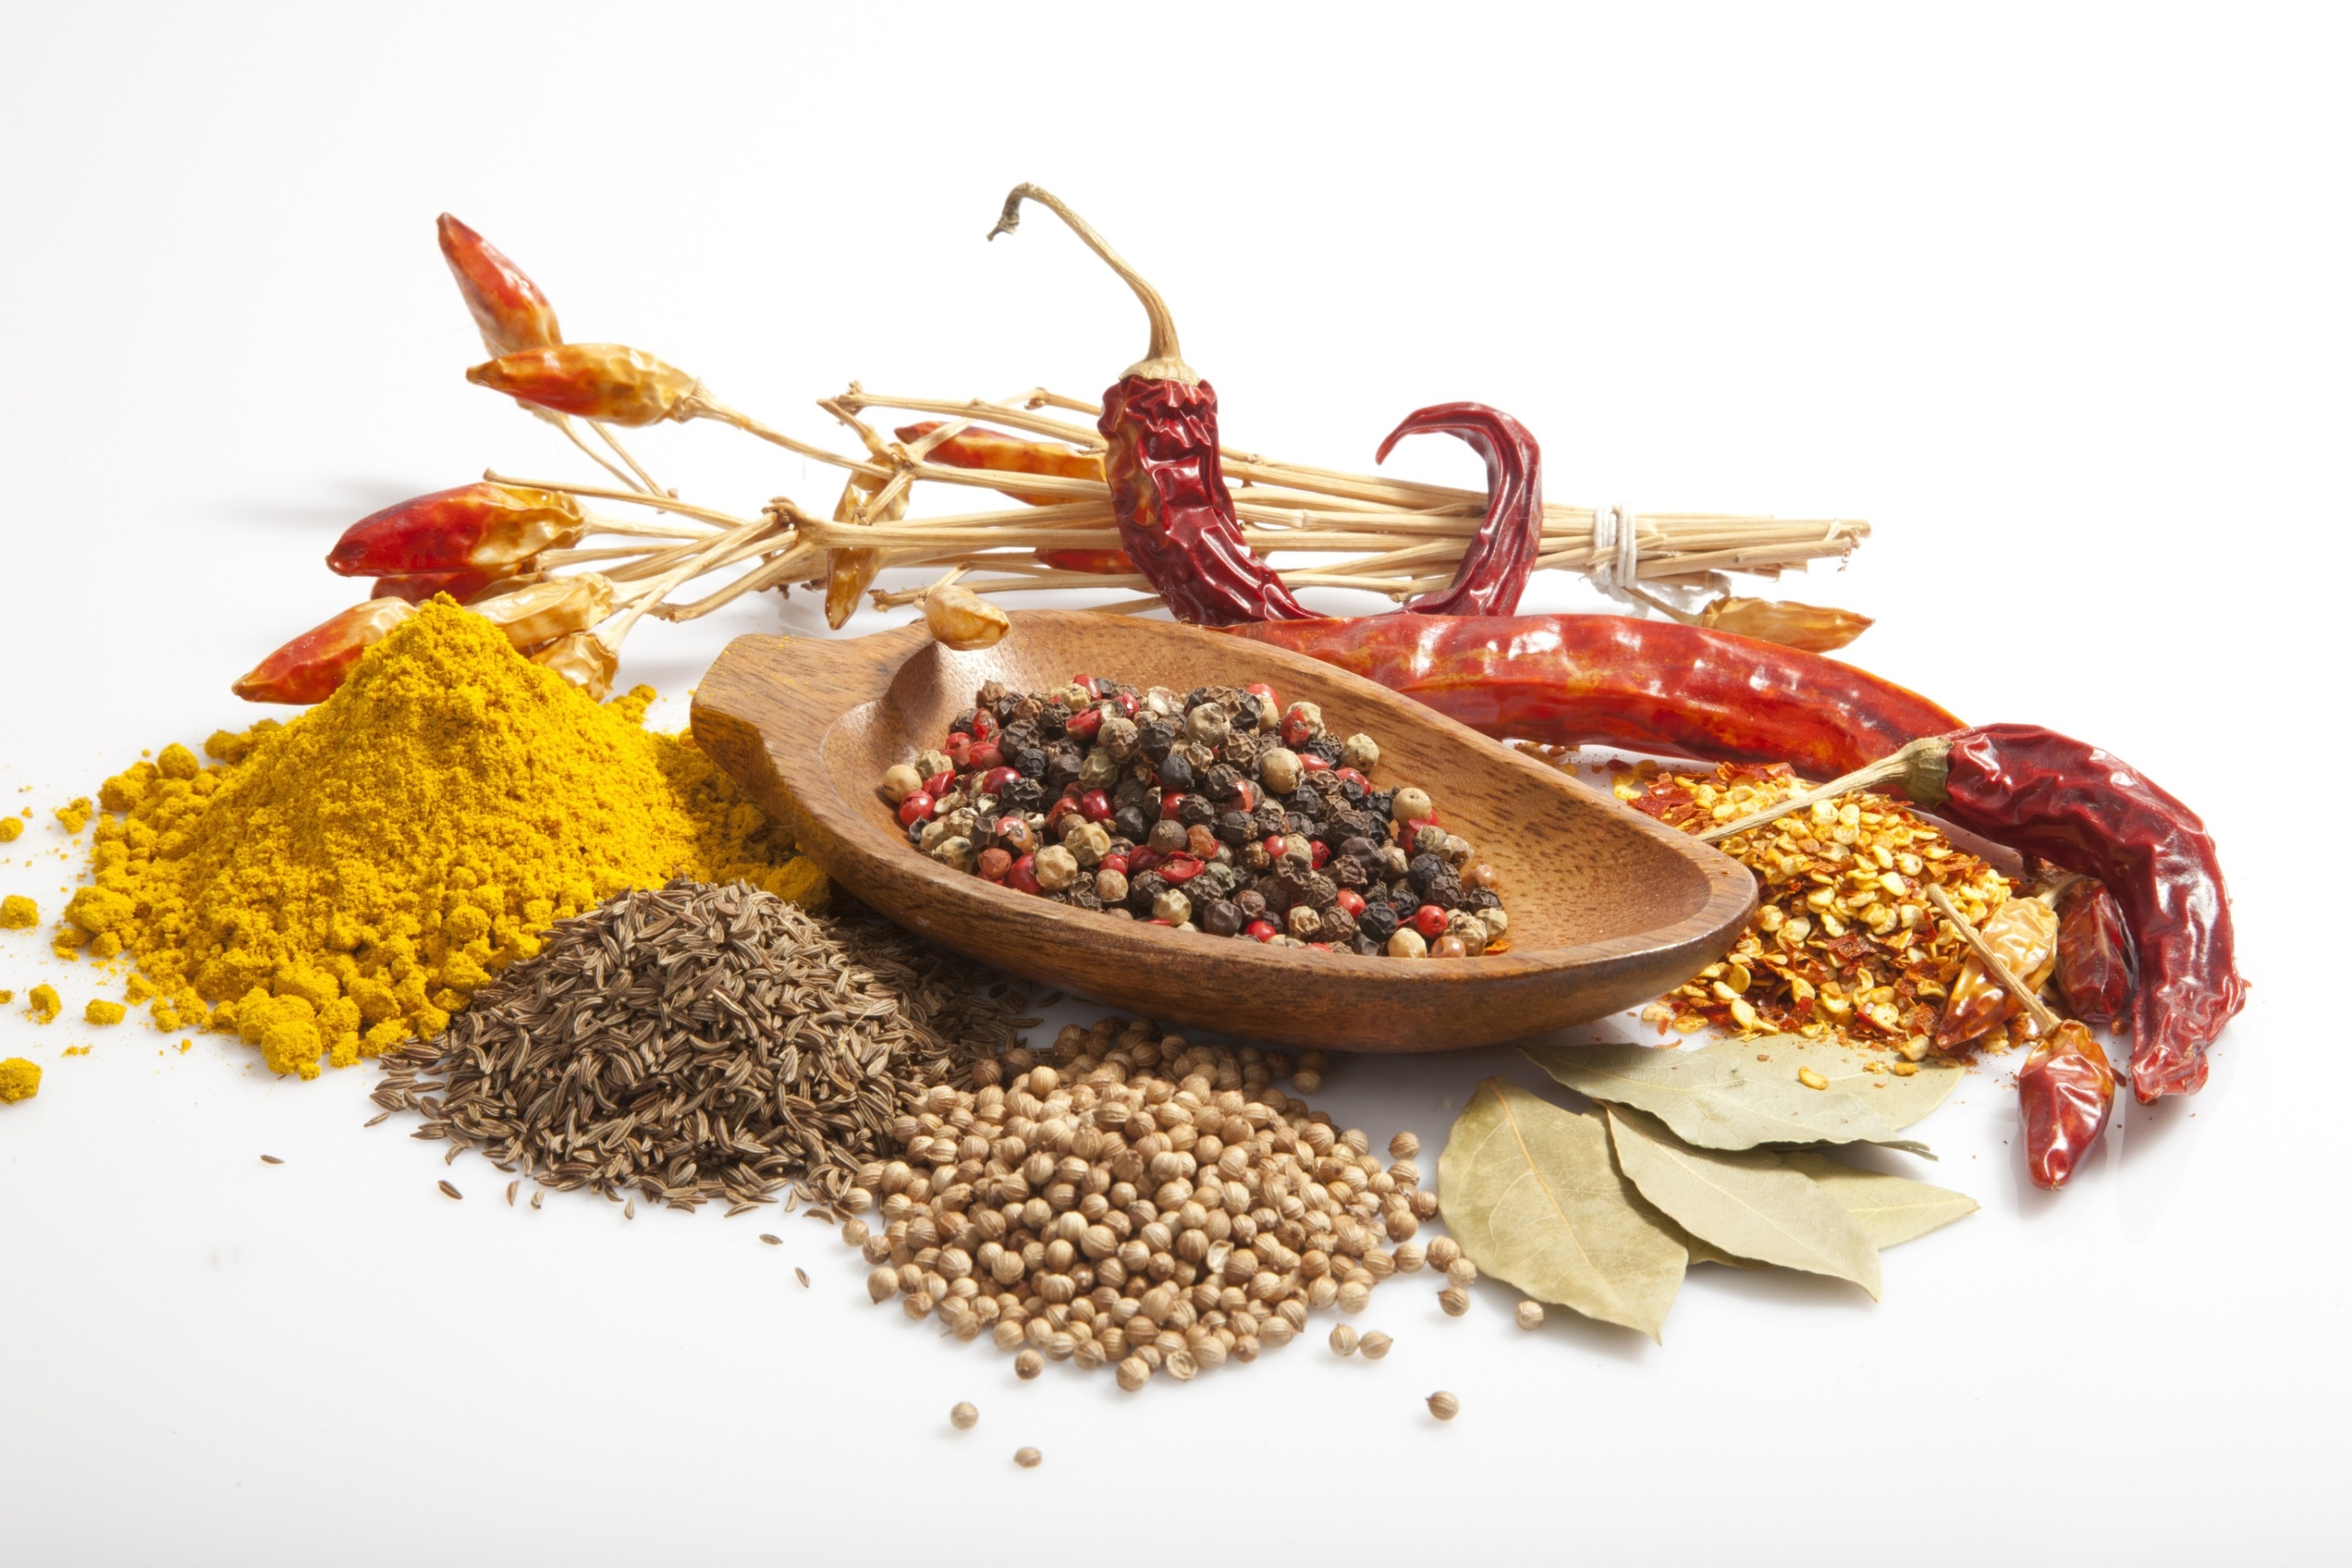 Spices and black pepper screenshot #1 2880x1920